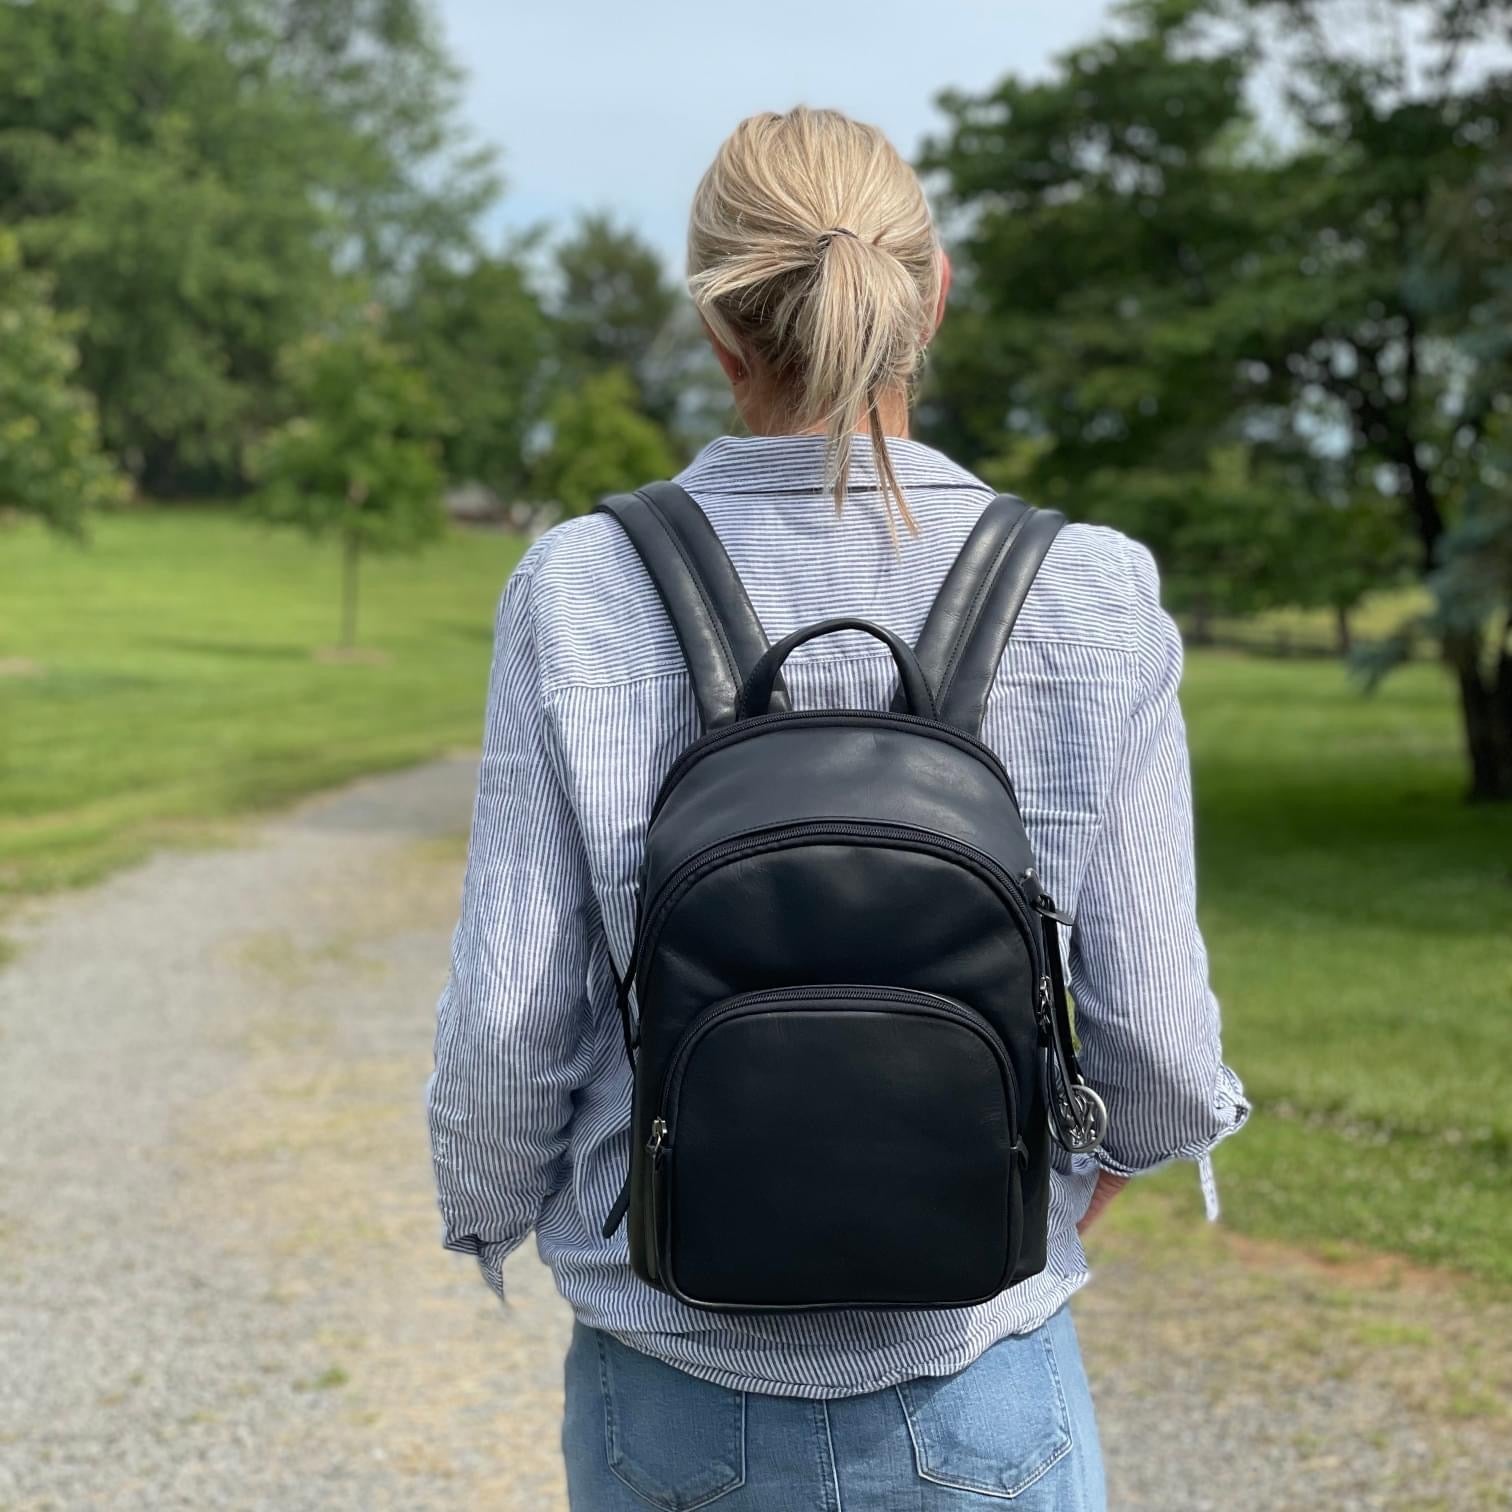 Smith & Wesson Sleek Leather Conceal Carry Backpack - Hiding Hilda, LLC